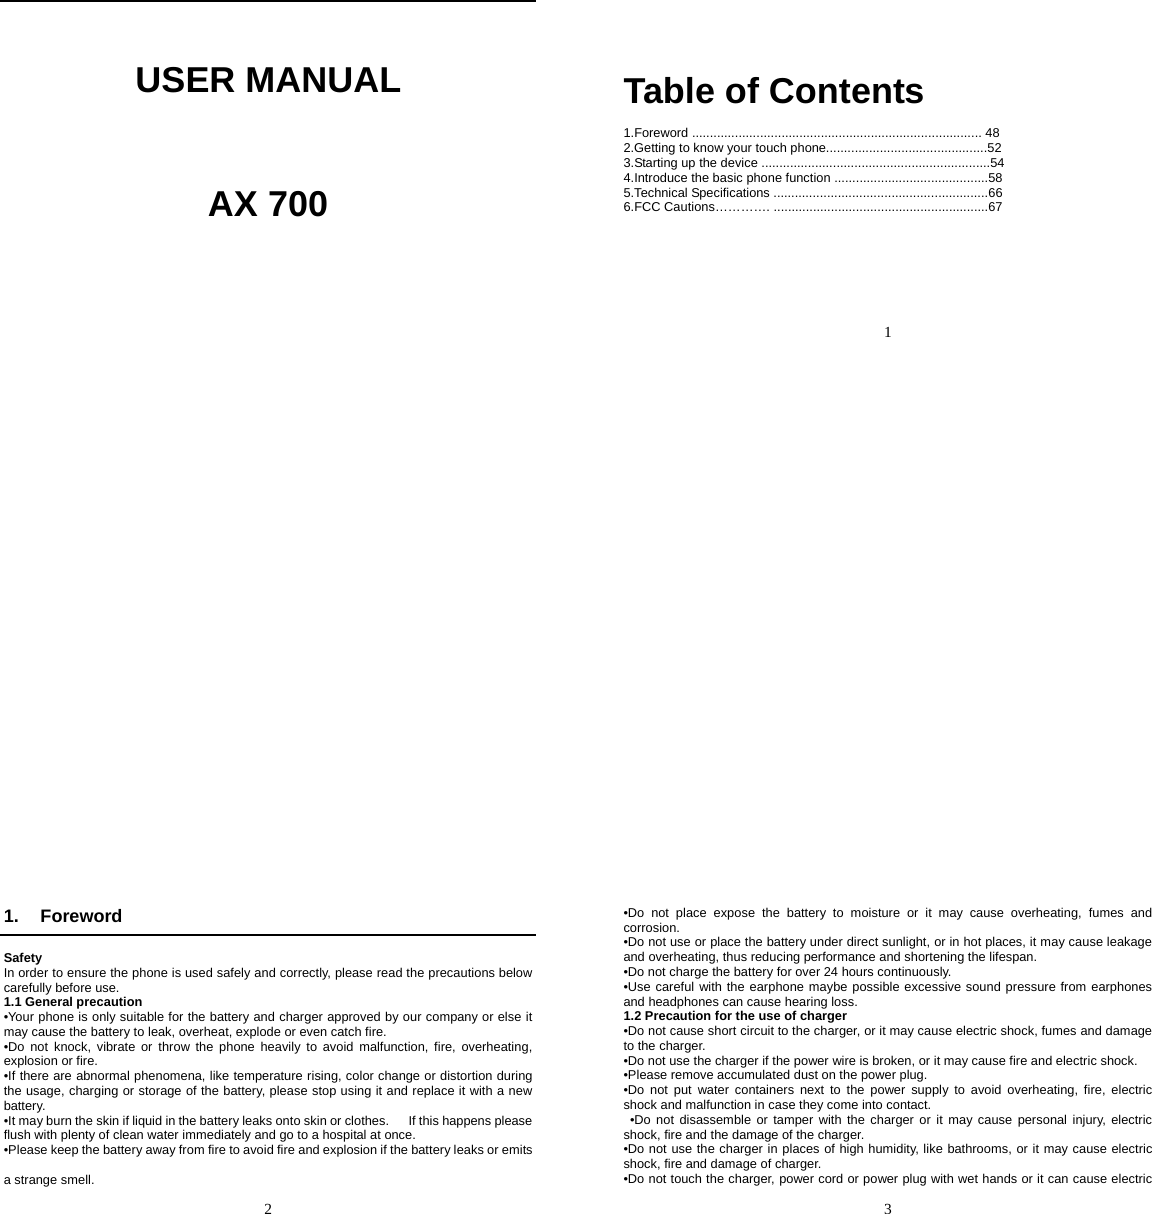     USER MANUAL     AX 700       1    Table of Contents  1.Foreword ................................................................................. 48 2.Getting to know your touch phone.............................................52 3.Starting up the device ................................................................54 4.Introduce the basic phone function ...........................................58 5.Technical Specifications ............................................................66 6.FCC Cautions…………. ............................................................67   2   1. Foreword  Safety In order to ensure the phone is used safely and correctly, please read the precautions below carefully before use. 1.1 General precaution •Your phone is only suitable for the battery and charger approved by our company or else it may cause the battery to leak, overheat, explode or even catch fire. •Do not knock, vibrate or throw the phone heavily to avoid malfunction, fire, overheating, explosion or fire. •If there are abnormal phenomena, like temperature rising, color change or distortion during the usage, charging or storage of the battery, please stop using it and replace it with a new battery. •It may burn the skin if liquid in the battery leaks onto skin or clothes.      If this happens please flush with plenty of clean water immediately and go to a hospital at once. •Please keep the battery away from fire to avoid fire and explosion if the battery leaks or emits   a strange smell.   3   •Do not place expose the battery to moisture or it may cause overheating, fumes and corrosion. •Do not use or place the battery under direct sunlight, or in hot places, it may cause leakage and overheating, thus reducing performance and shortening the lifespan. •Do not charge the battery for over 24 hours continuously. •Use careful with the earphone maybe possible excessive sound pressure from earphones and headphones can cause hearing loss. 1.2 Precaution for the use of charger •Do not cause short circuit to the charger, or it may cause electric shock, fumes and damage to the charger. •Do not use the charger if the power wire is broken, or it may cause fire and electric shock. •Please remove accumulated dust on the power plug. •Do not put water containers next to the power supply to avoid overheating, fire, electric shock and malfunction in case they come into contact.  •Do not disassemble or tamper with the charger or it may cause personal injury, electric shock, fire and the damage of the charger. •Do not use the charger in places of high humidity, like bathrooms, or it may cause electric shock, fire and damage of charger. •Do not touch the charger, power cord or power plug with wet hands or it can cause electric 